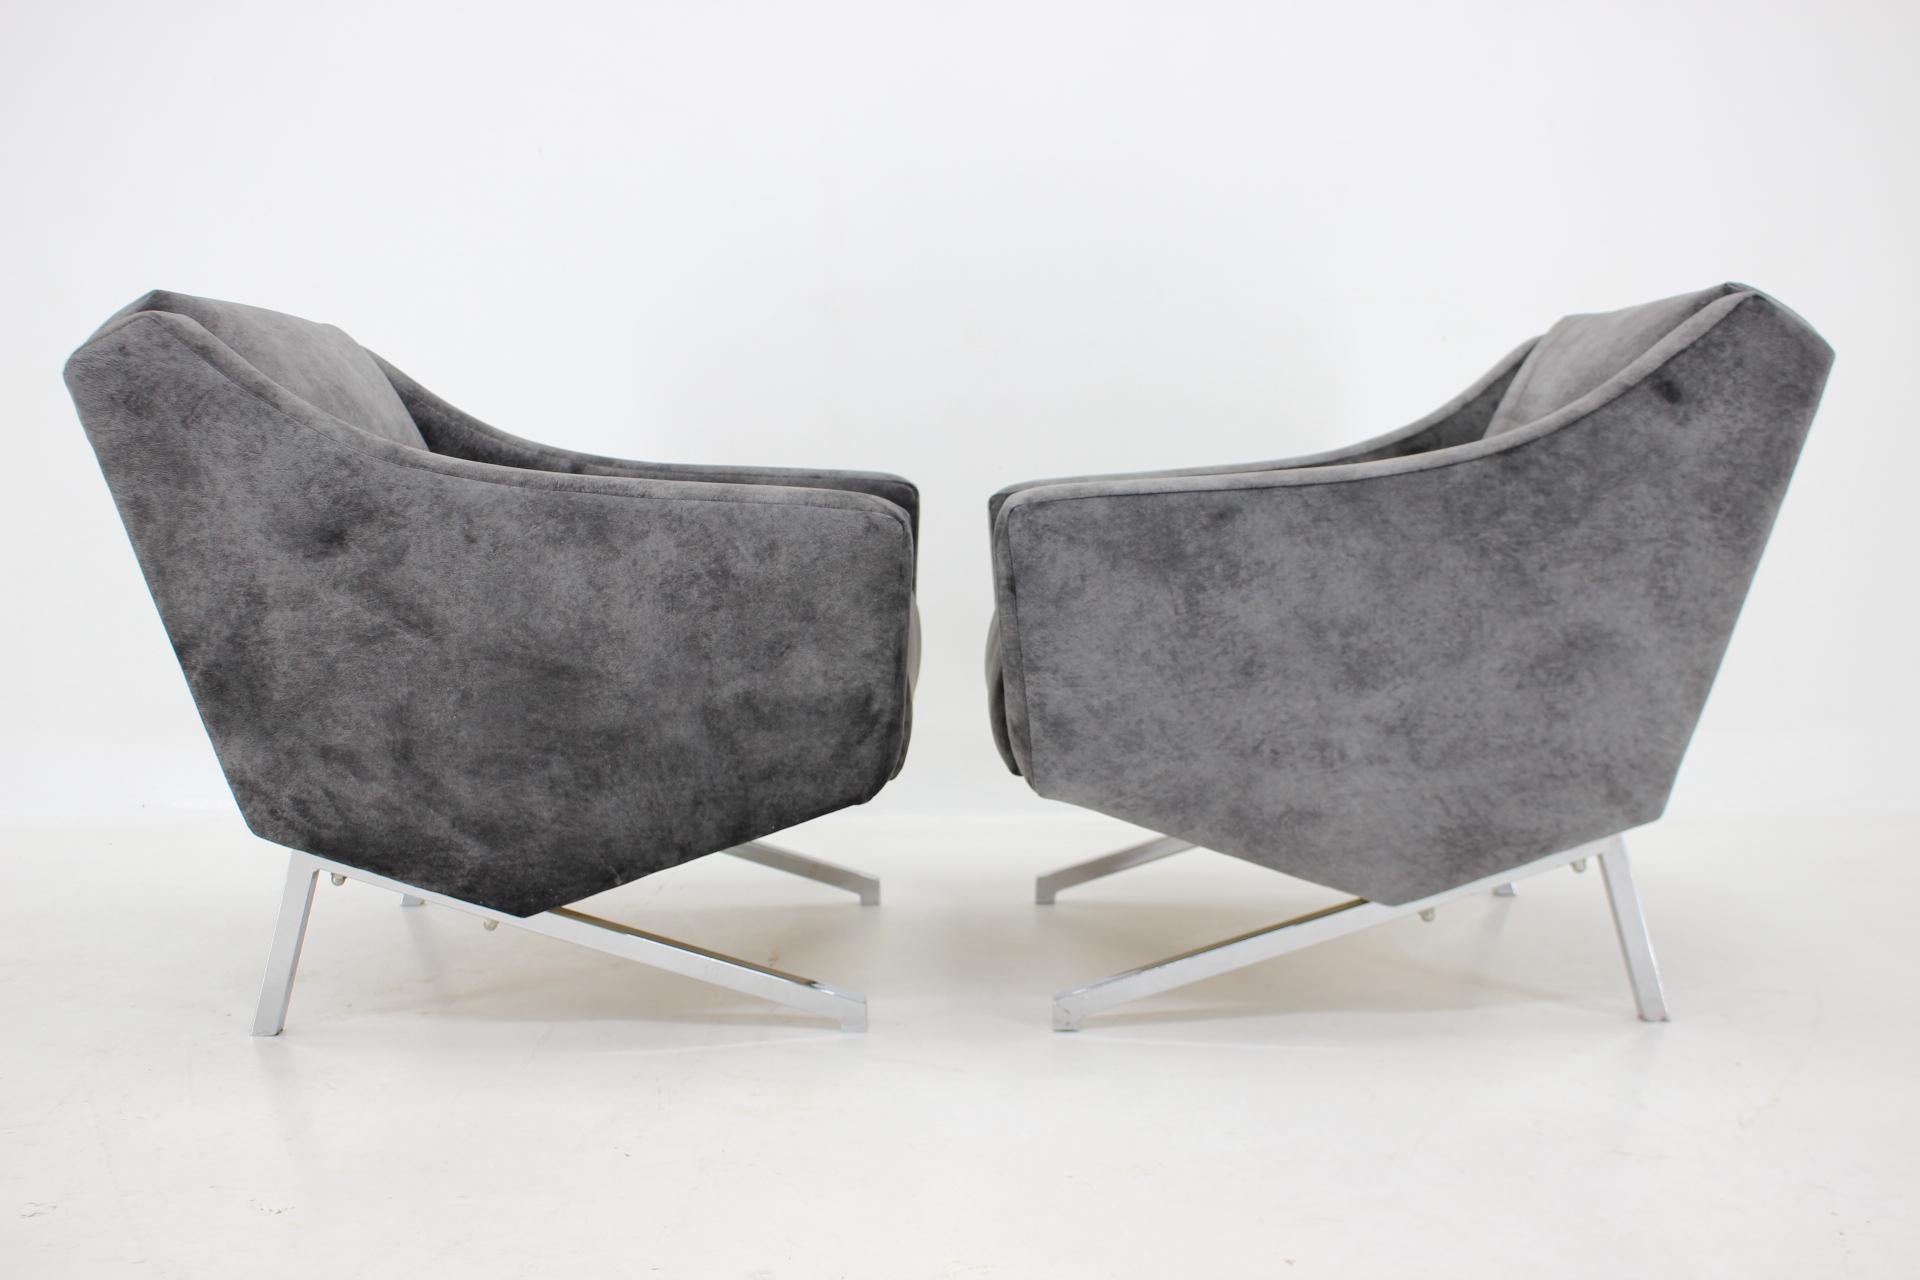 - Newly upholstered in charcoal black color velvet fabric.
- Chrome plated legs with minor signs of use were repolished.